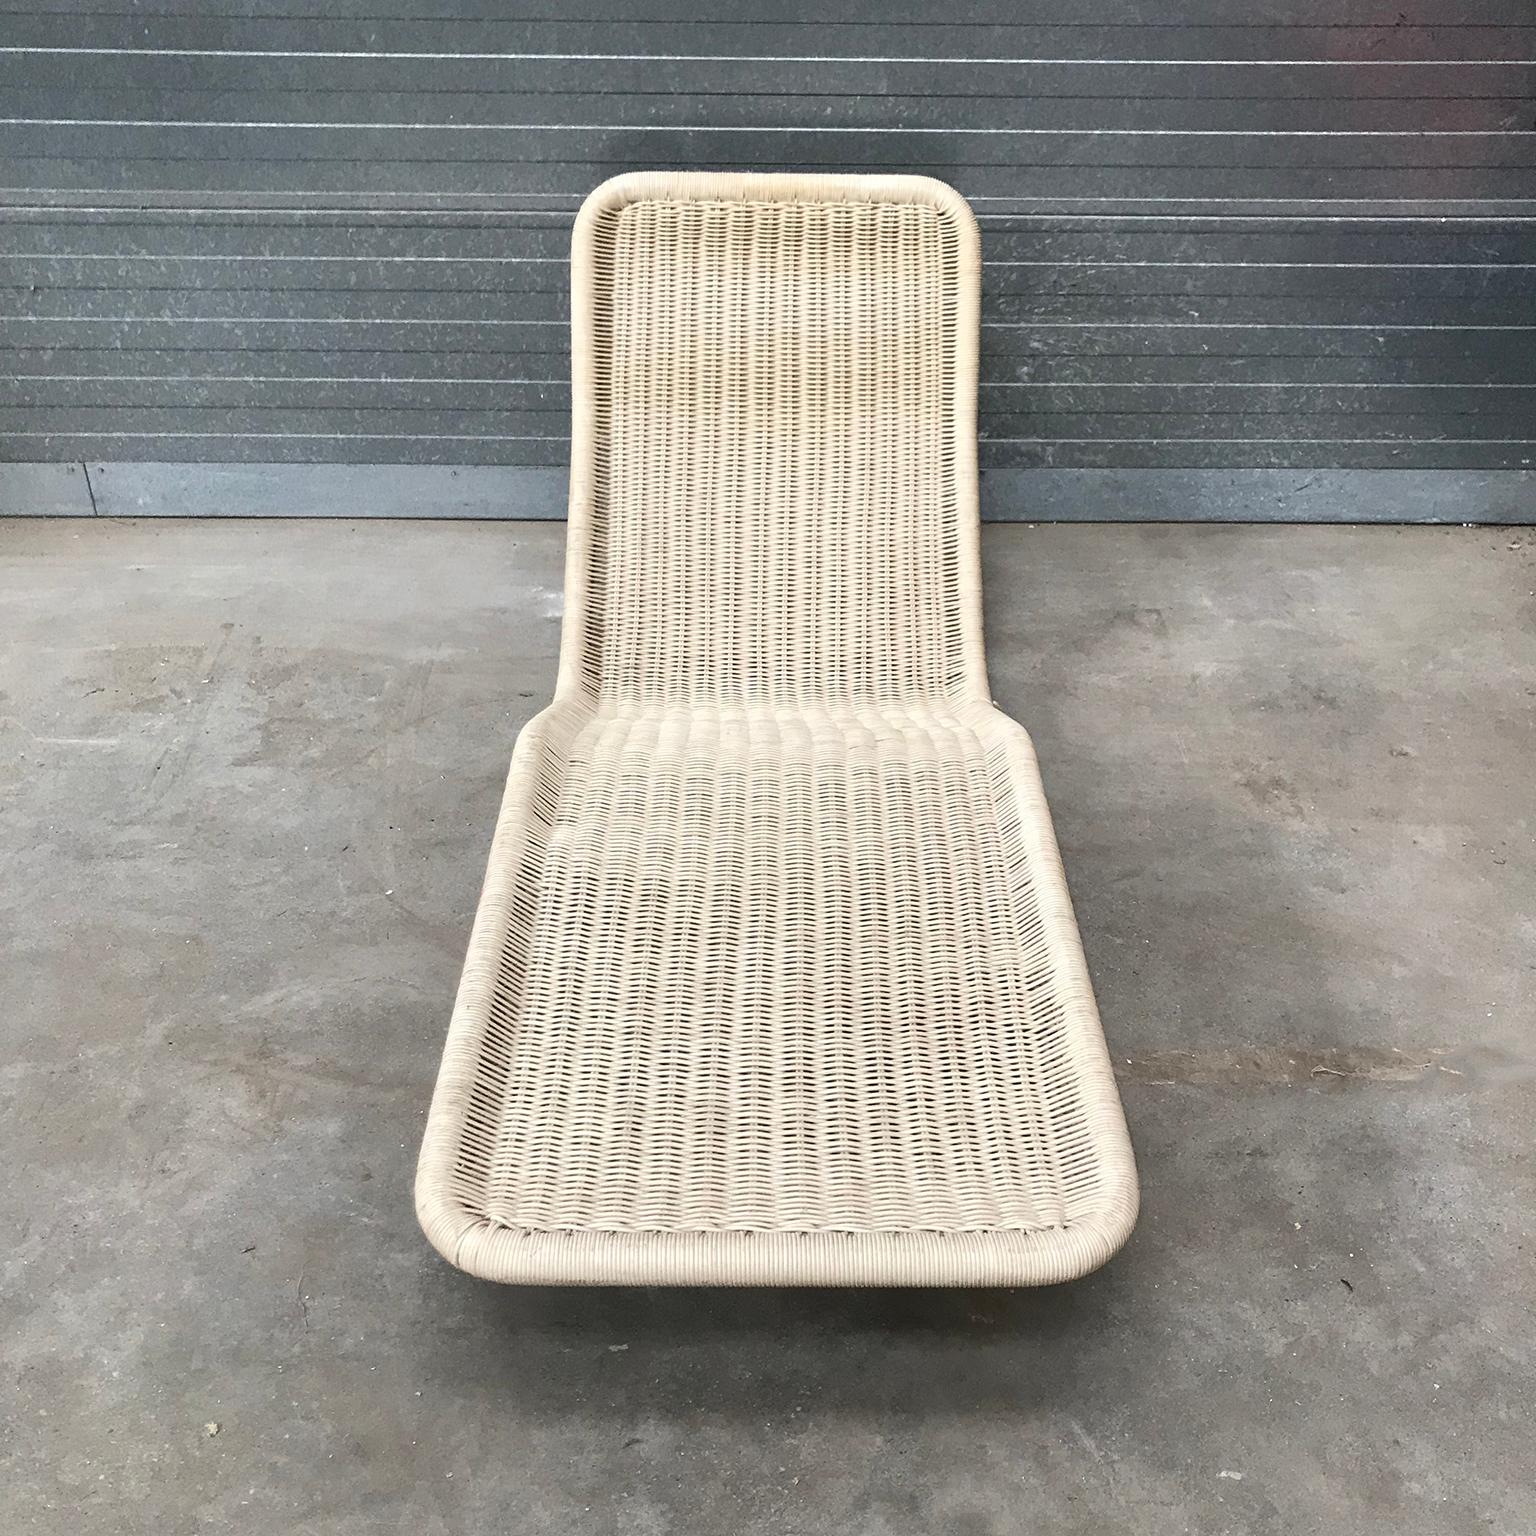 Finnish 1968, Antti Nurmesniemi, for Tecta Germany, Plastic Wicker Lounge Chair F10 For Sale